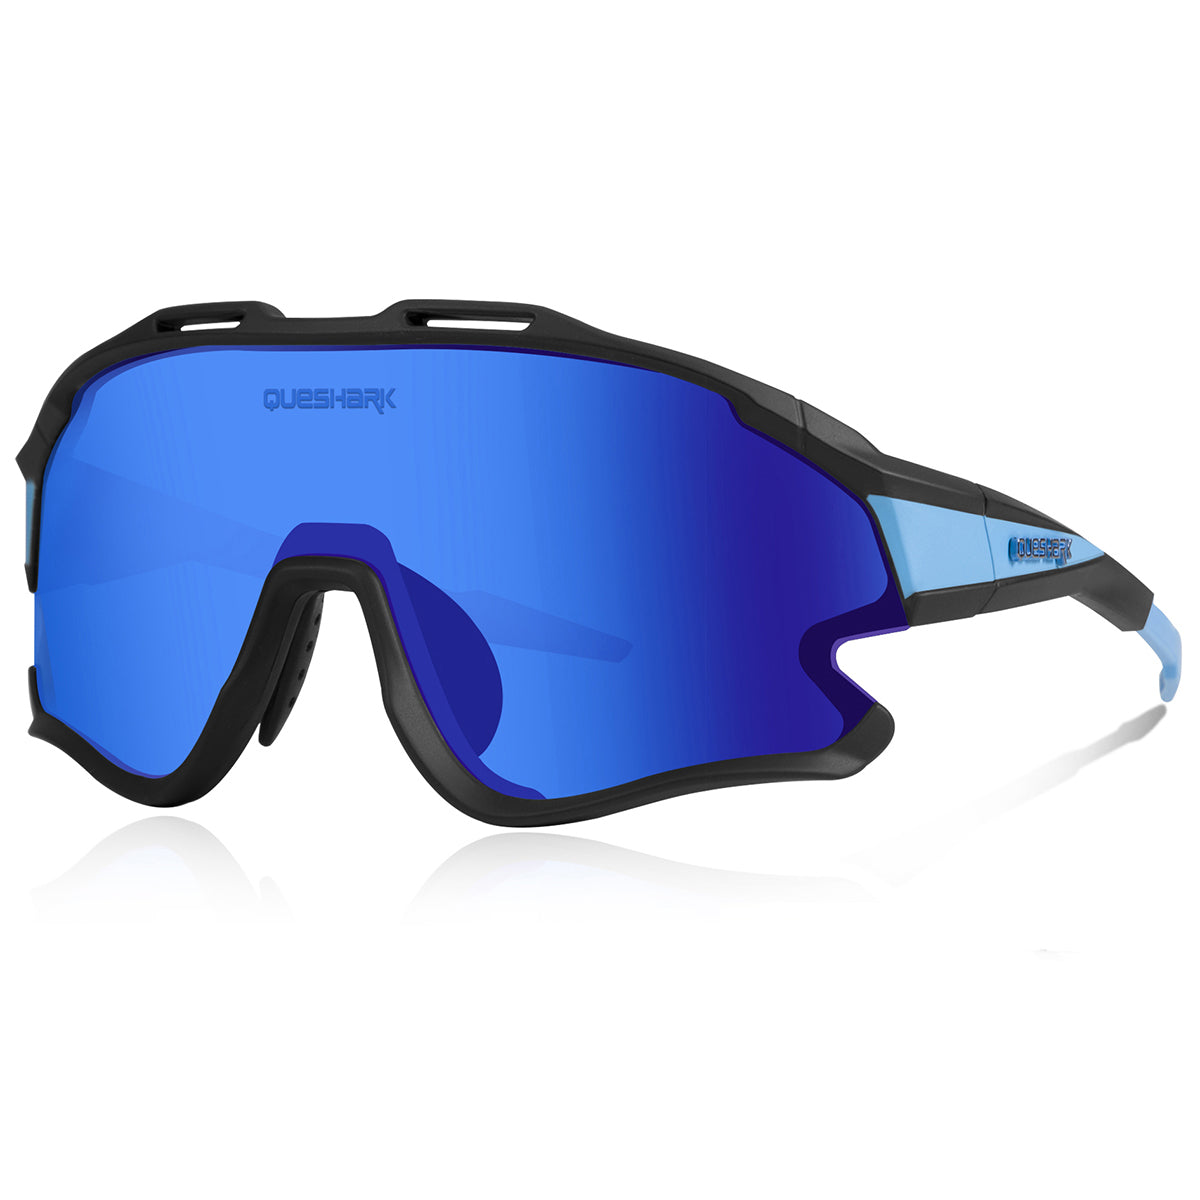 ROCKBROS Polarized Sunglasses Cycling Glasses for Outdoor Sports